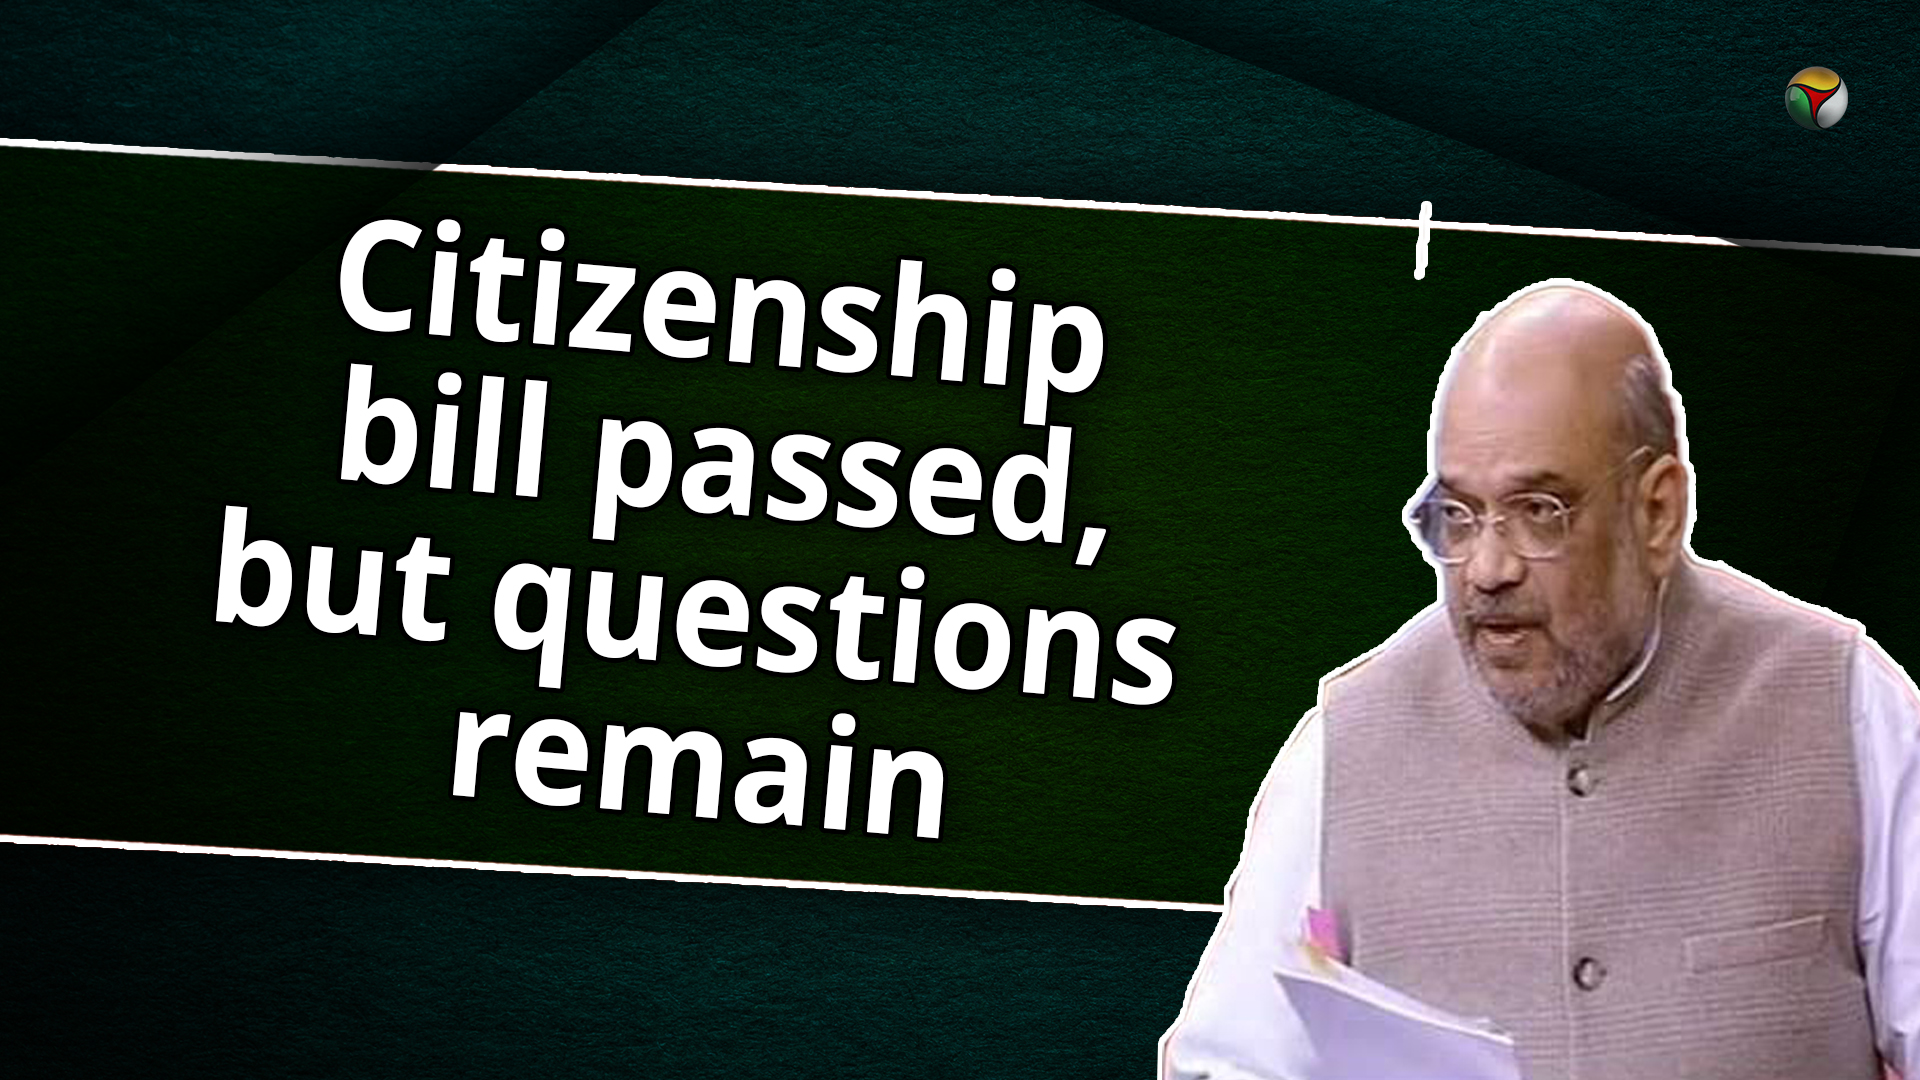 Citizenship bill passed, but questions remain